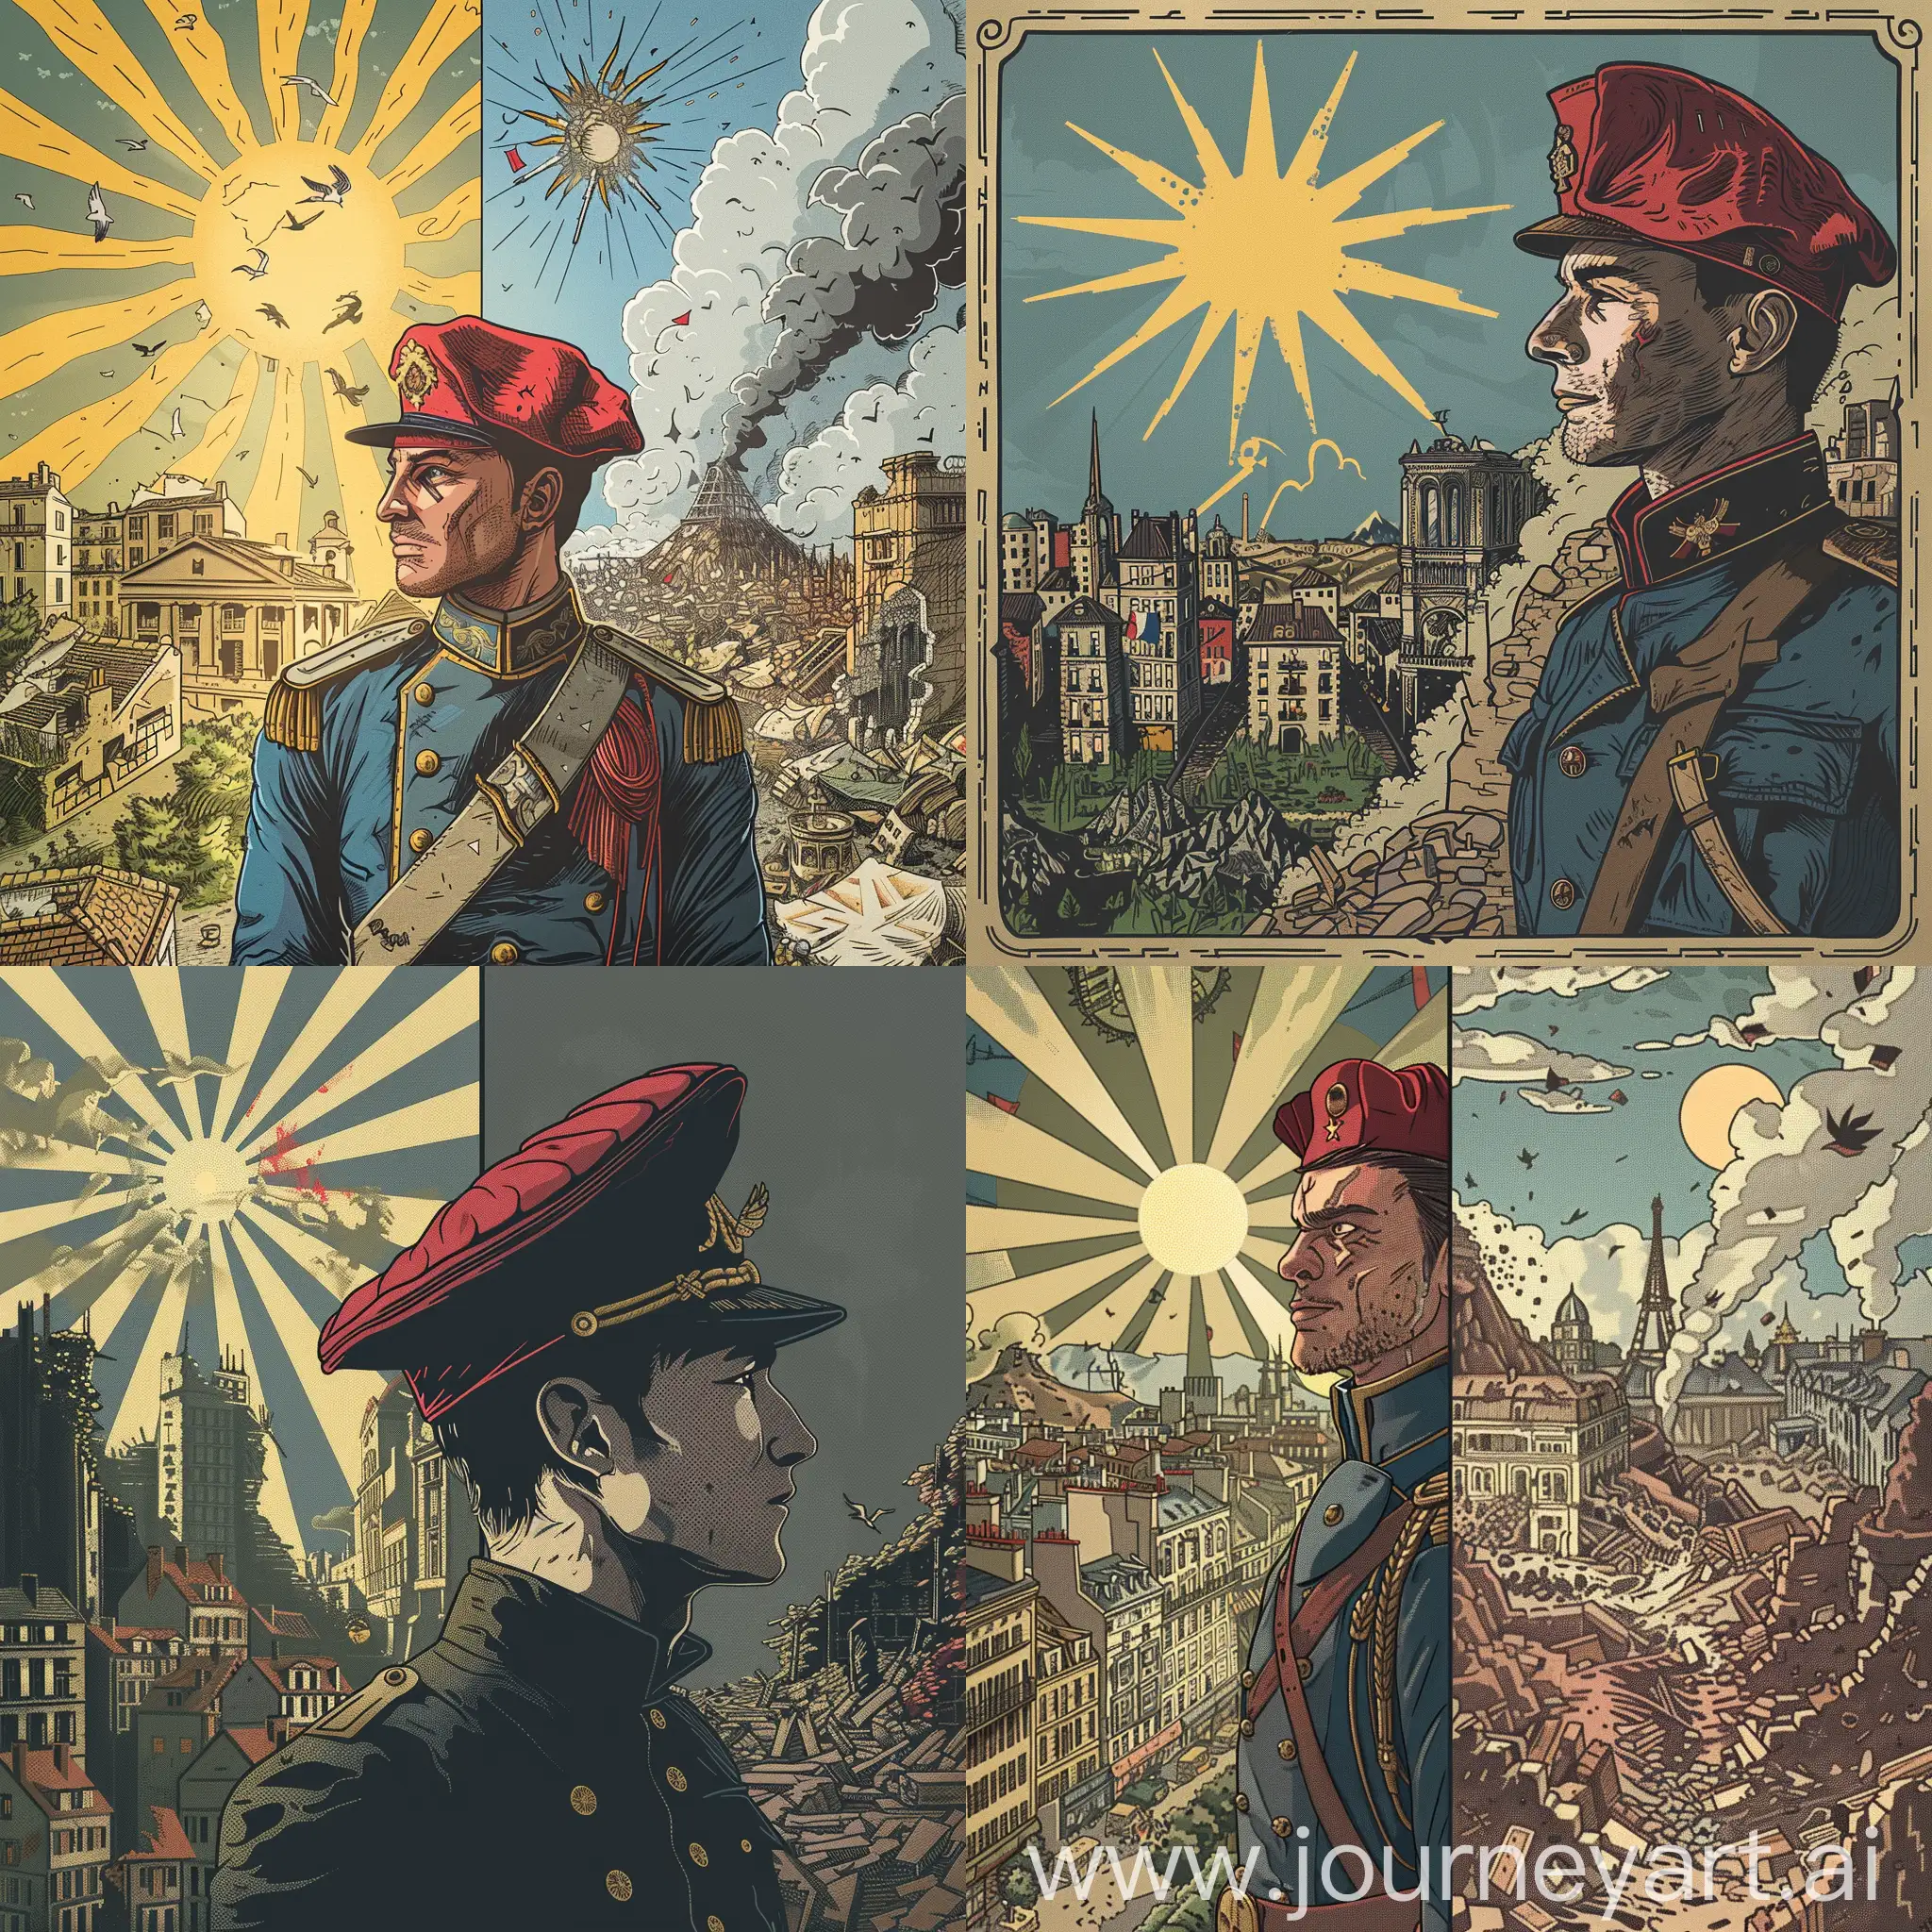 A man in a revolutionary French uniform with a red guerrilla beret. To his left is a happy city, fanned by the sun. To his right is a ruined city. Depict it in the style of 1939 and in color.
